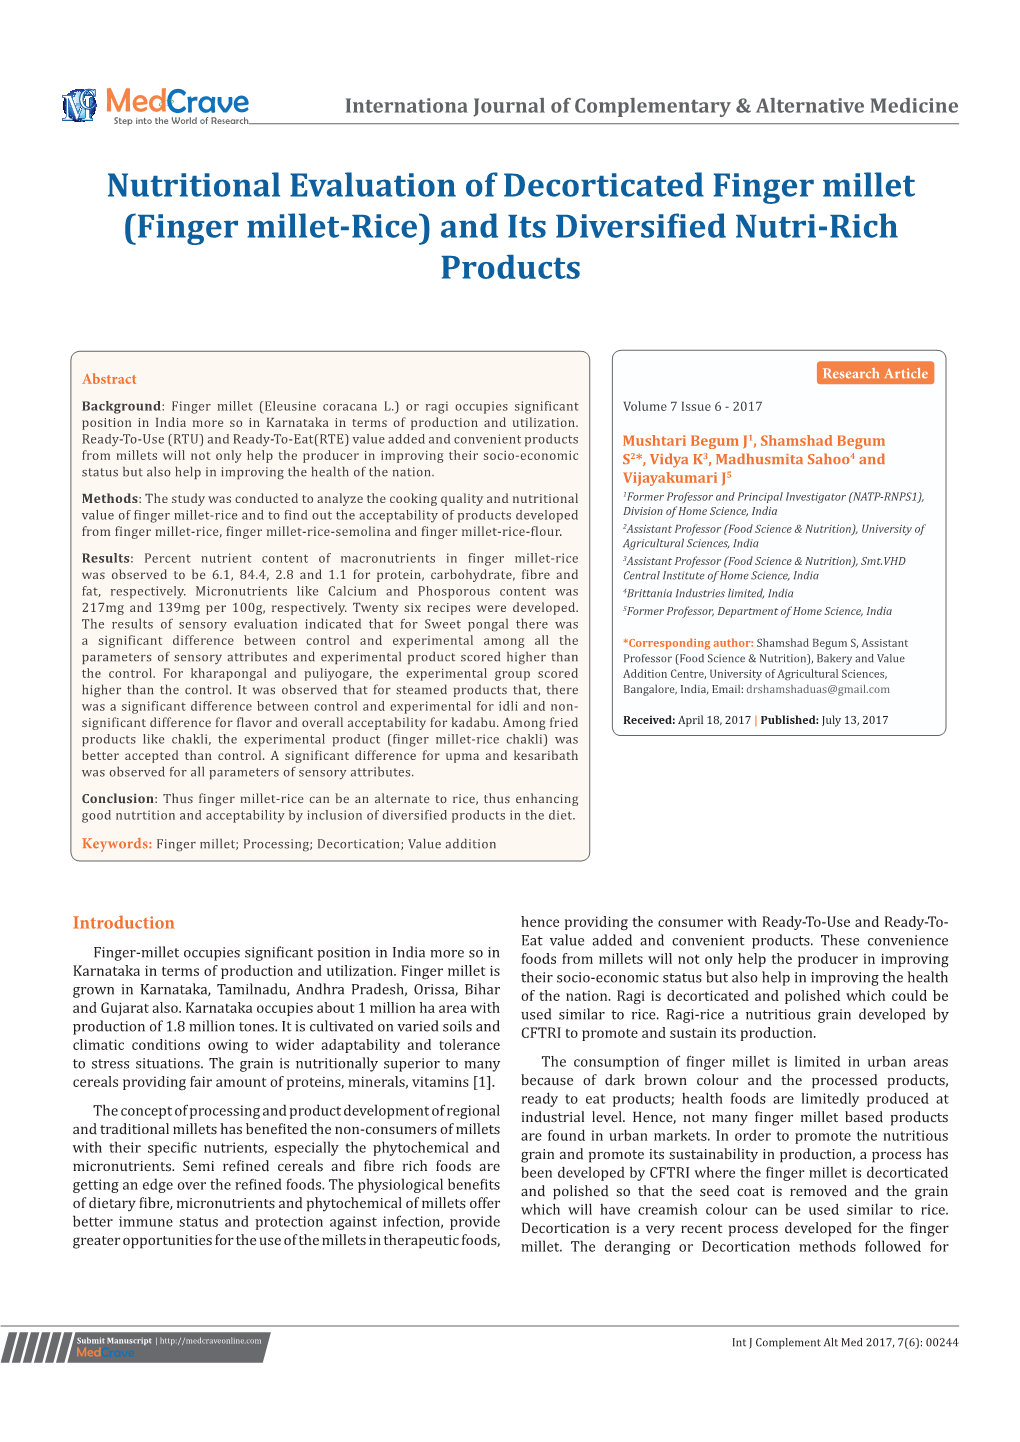 Finger Millet-Rice) and Its Diversified Nutri-Rich Products